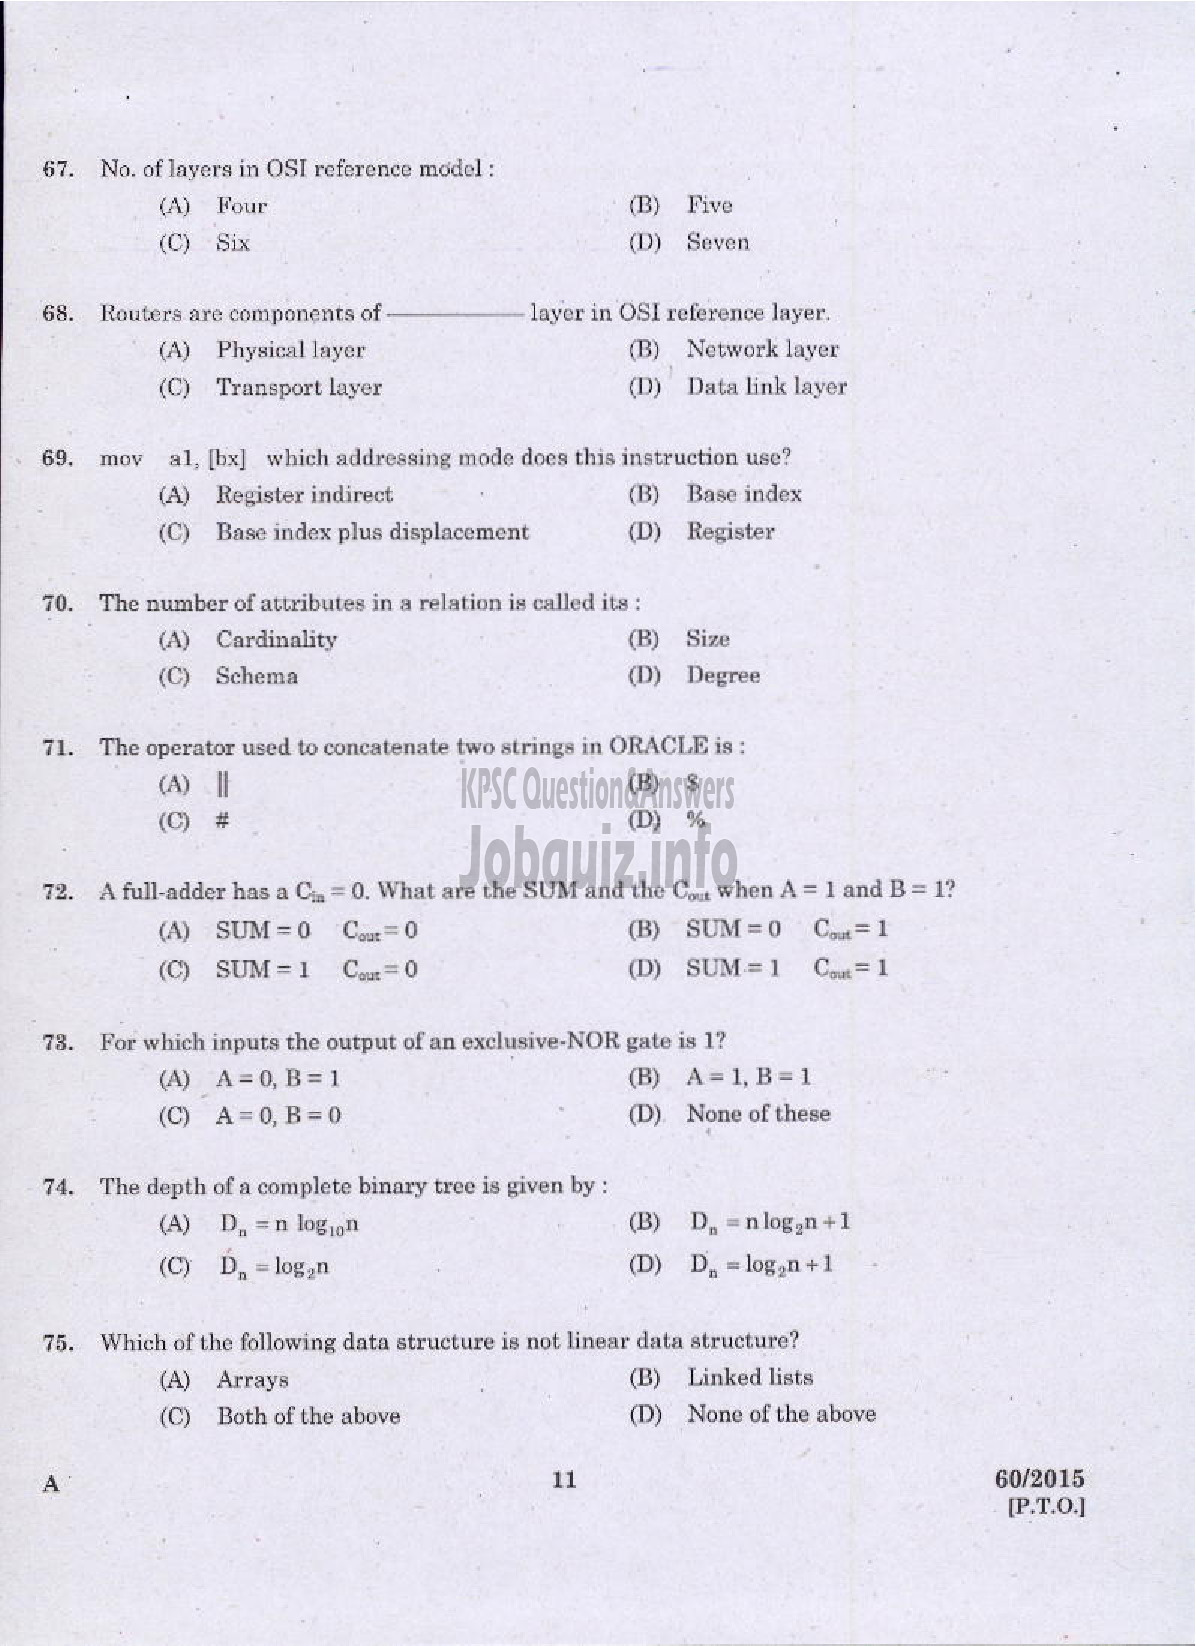 Kerala PSC Question Paper - COMPUTER PROGRAMMER TECHNICAL EDUCATION ENGINEERING COLLEGES-9